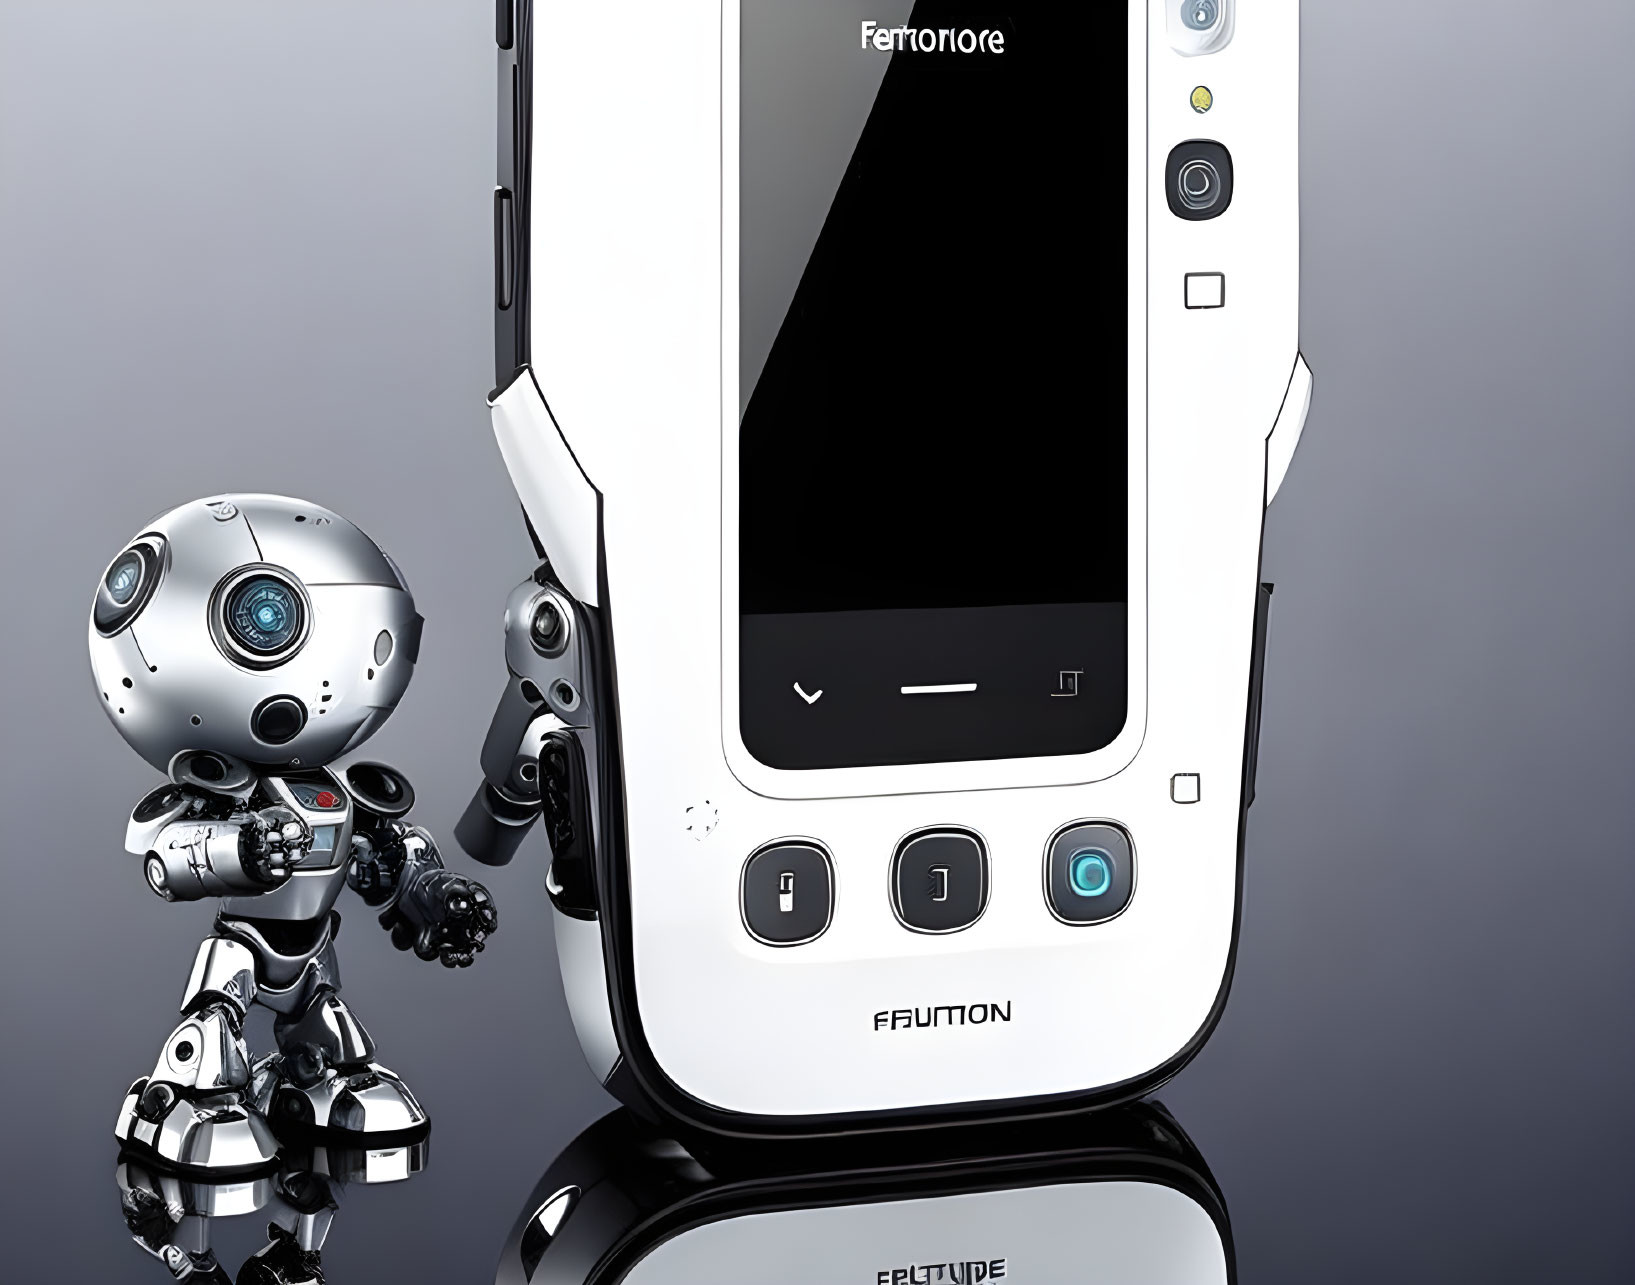 Futuristic humanoid robot with spherical joints and handheld device on reflective surface